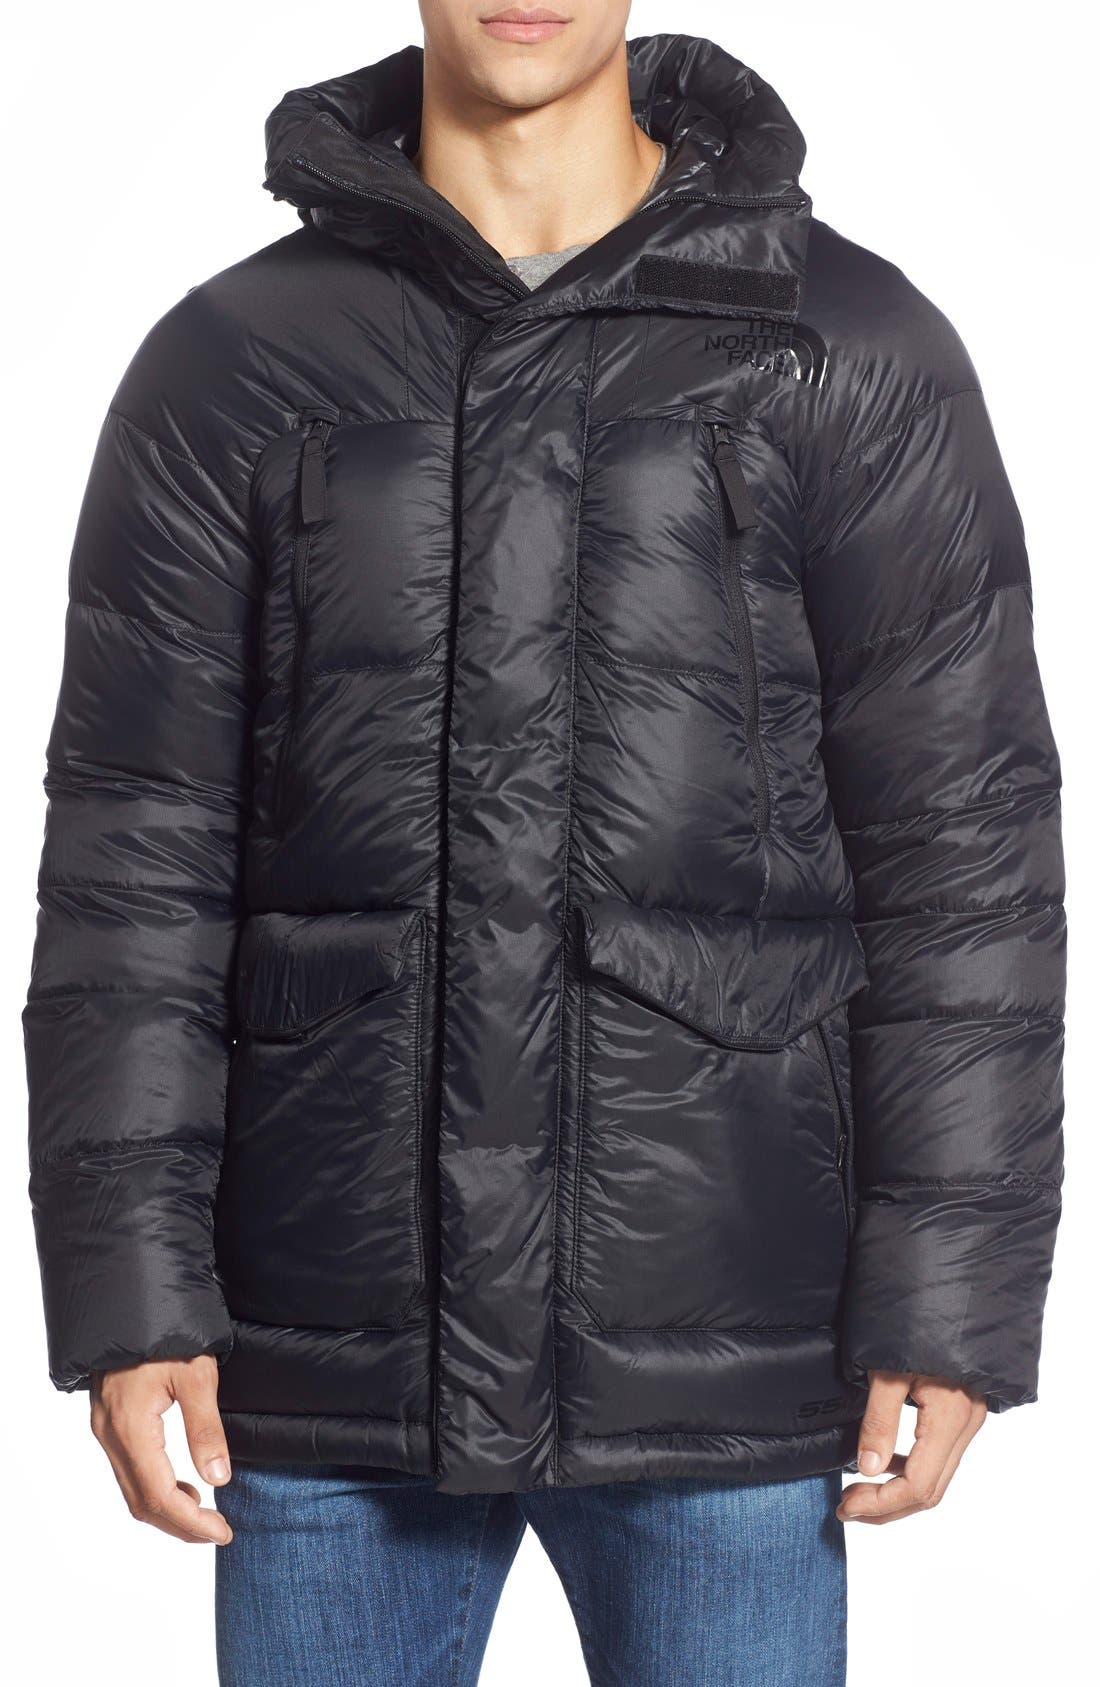 The North Face 'Polar Journey' Hooded 